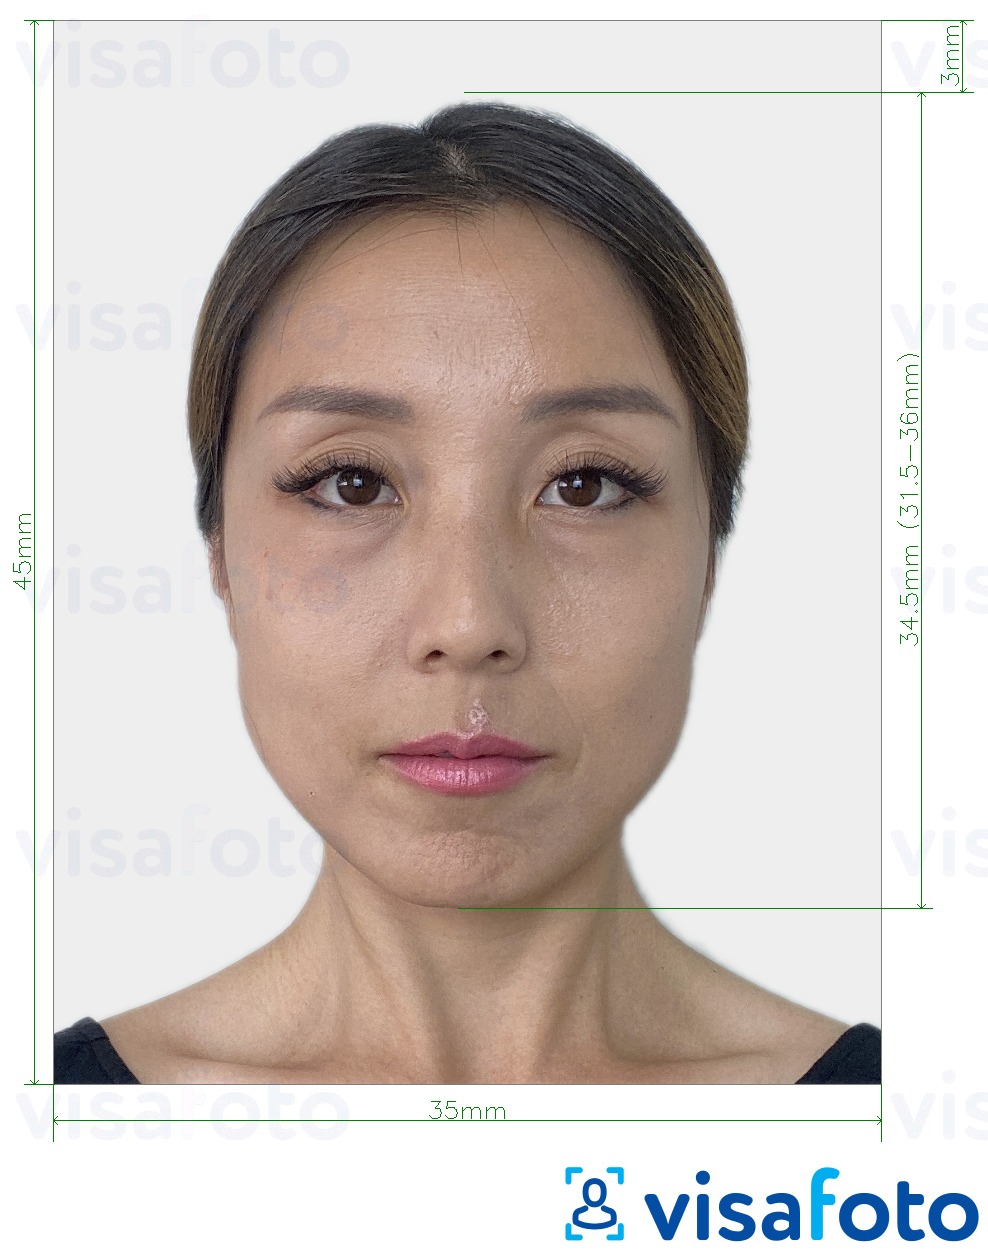 Example of photo for Japan visa 35x45 mm with exact size specification